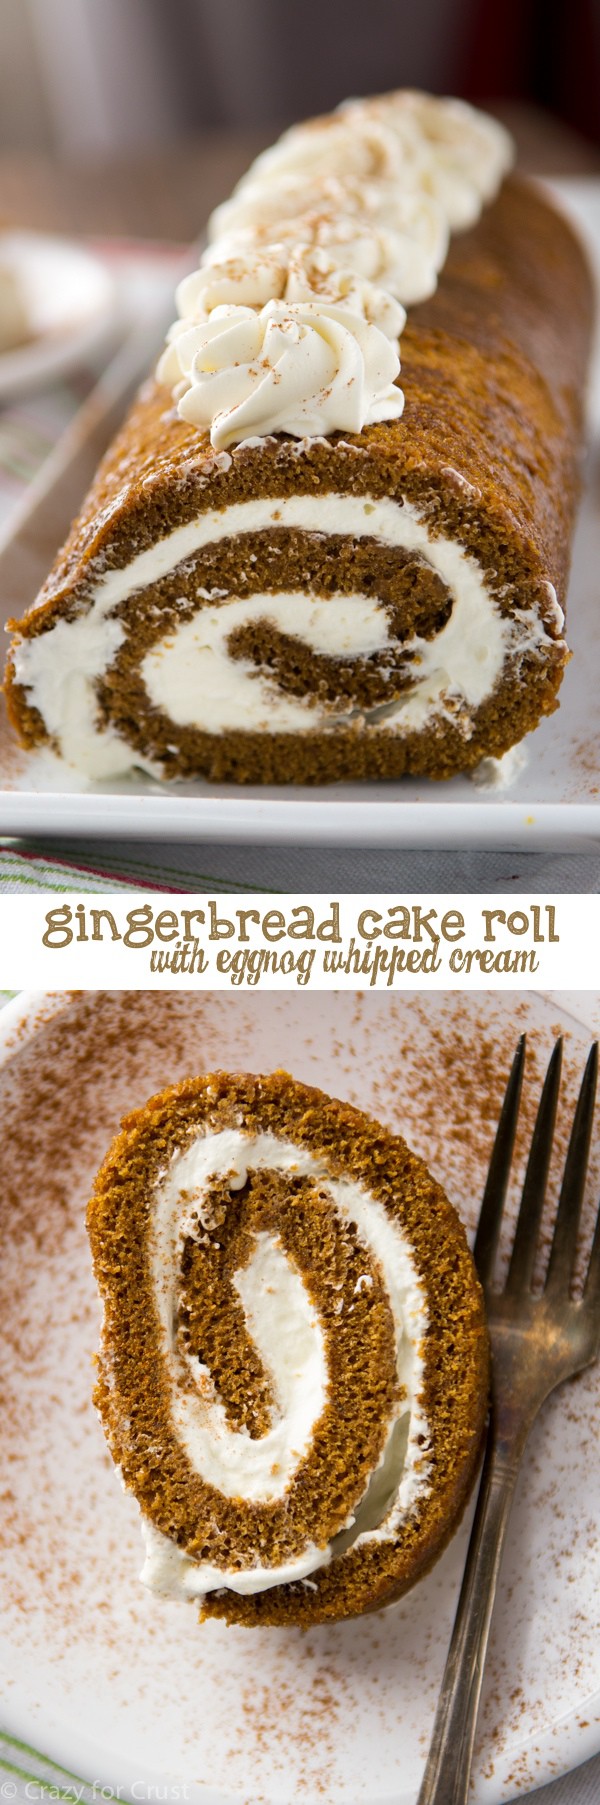 Gingerbread Cake Roll filled with Eggnog Whipped Cream - perfect for any Christmas party!